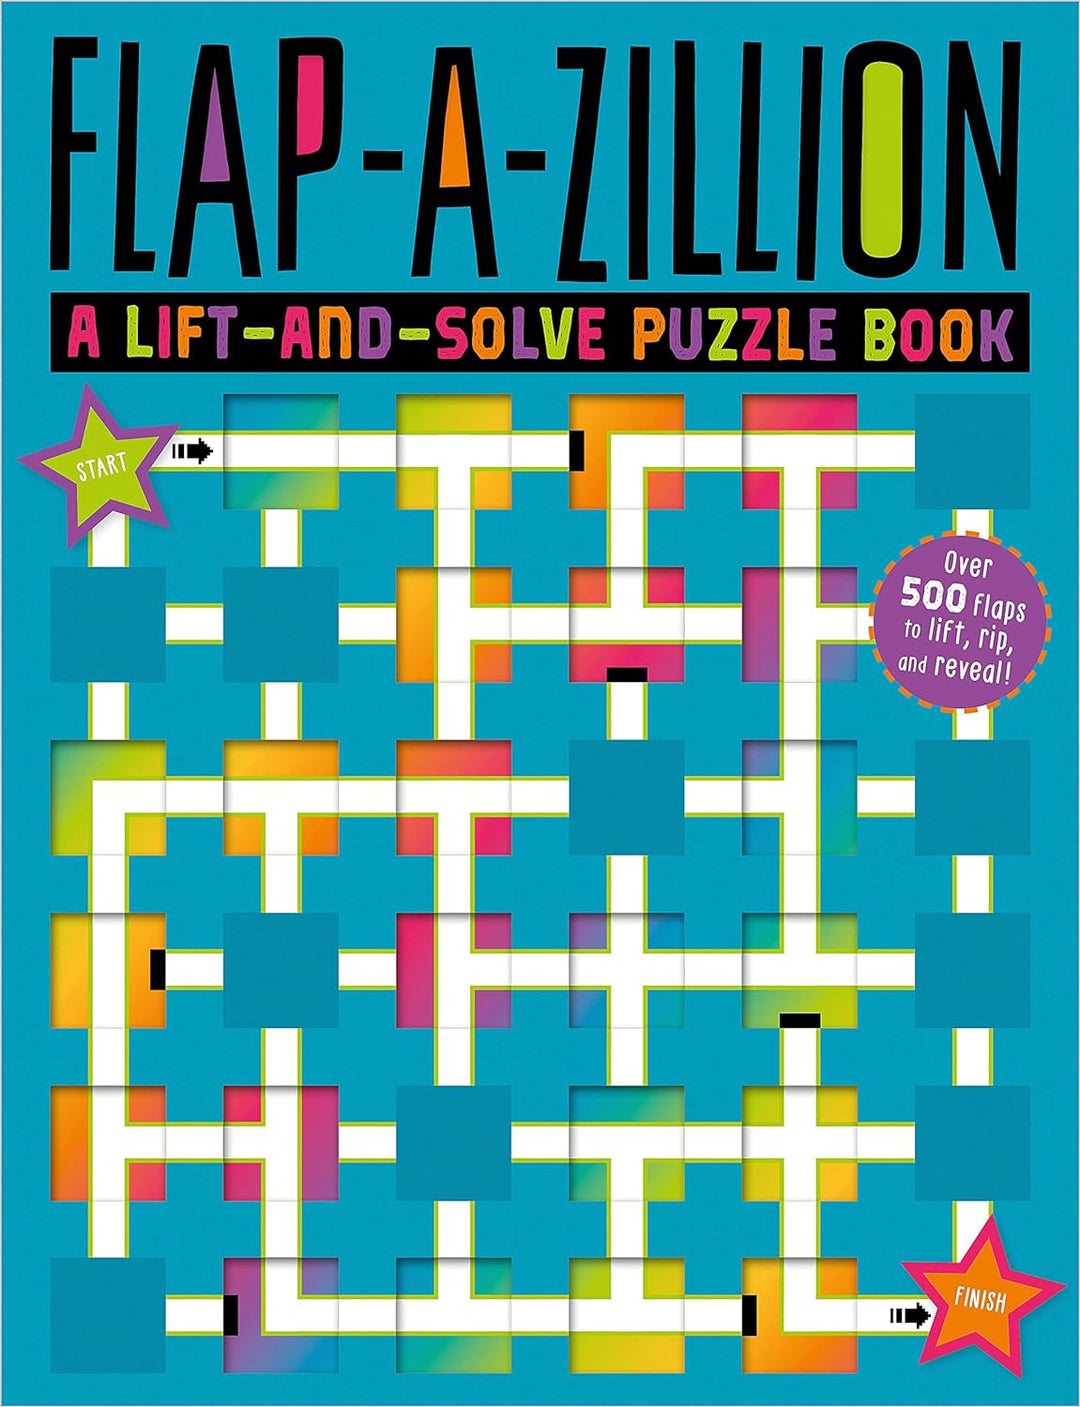 Puzzle Book<br> Lift-and-Solve<br> Flap-A-Zillion